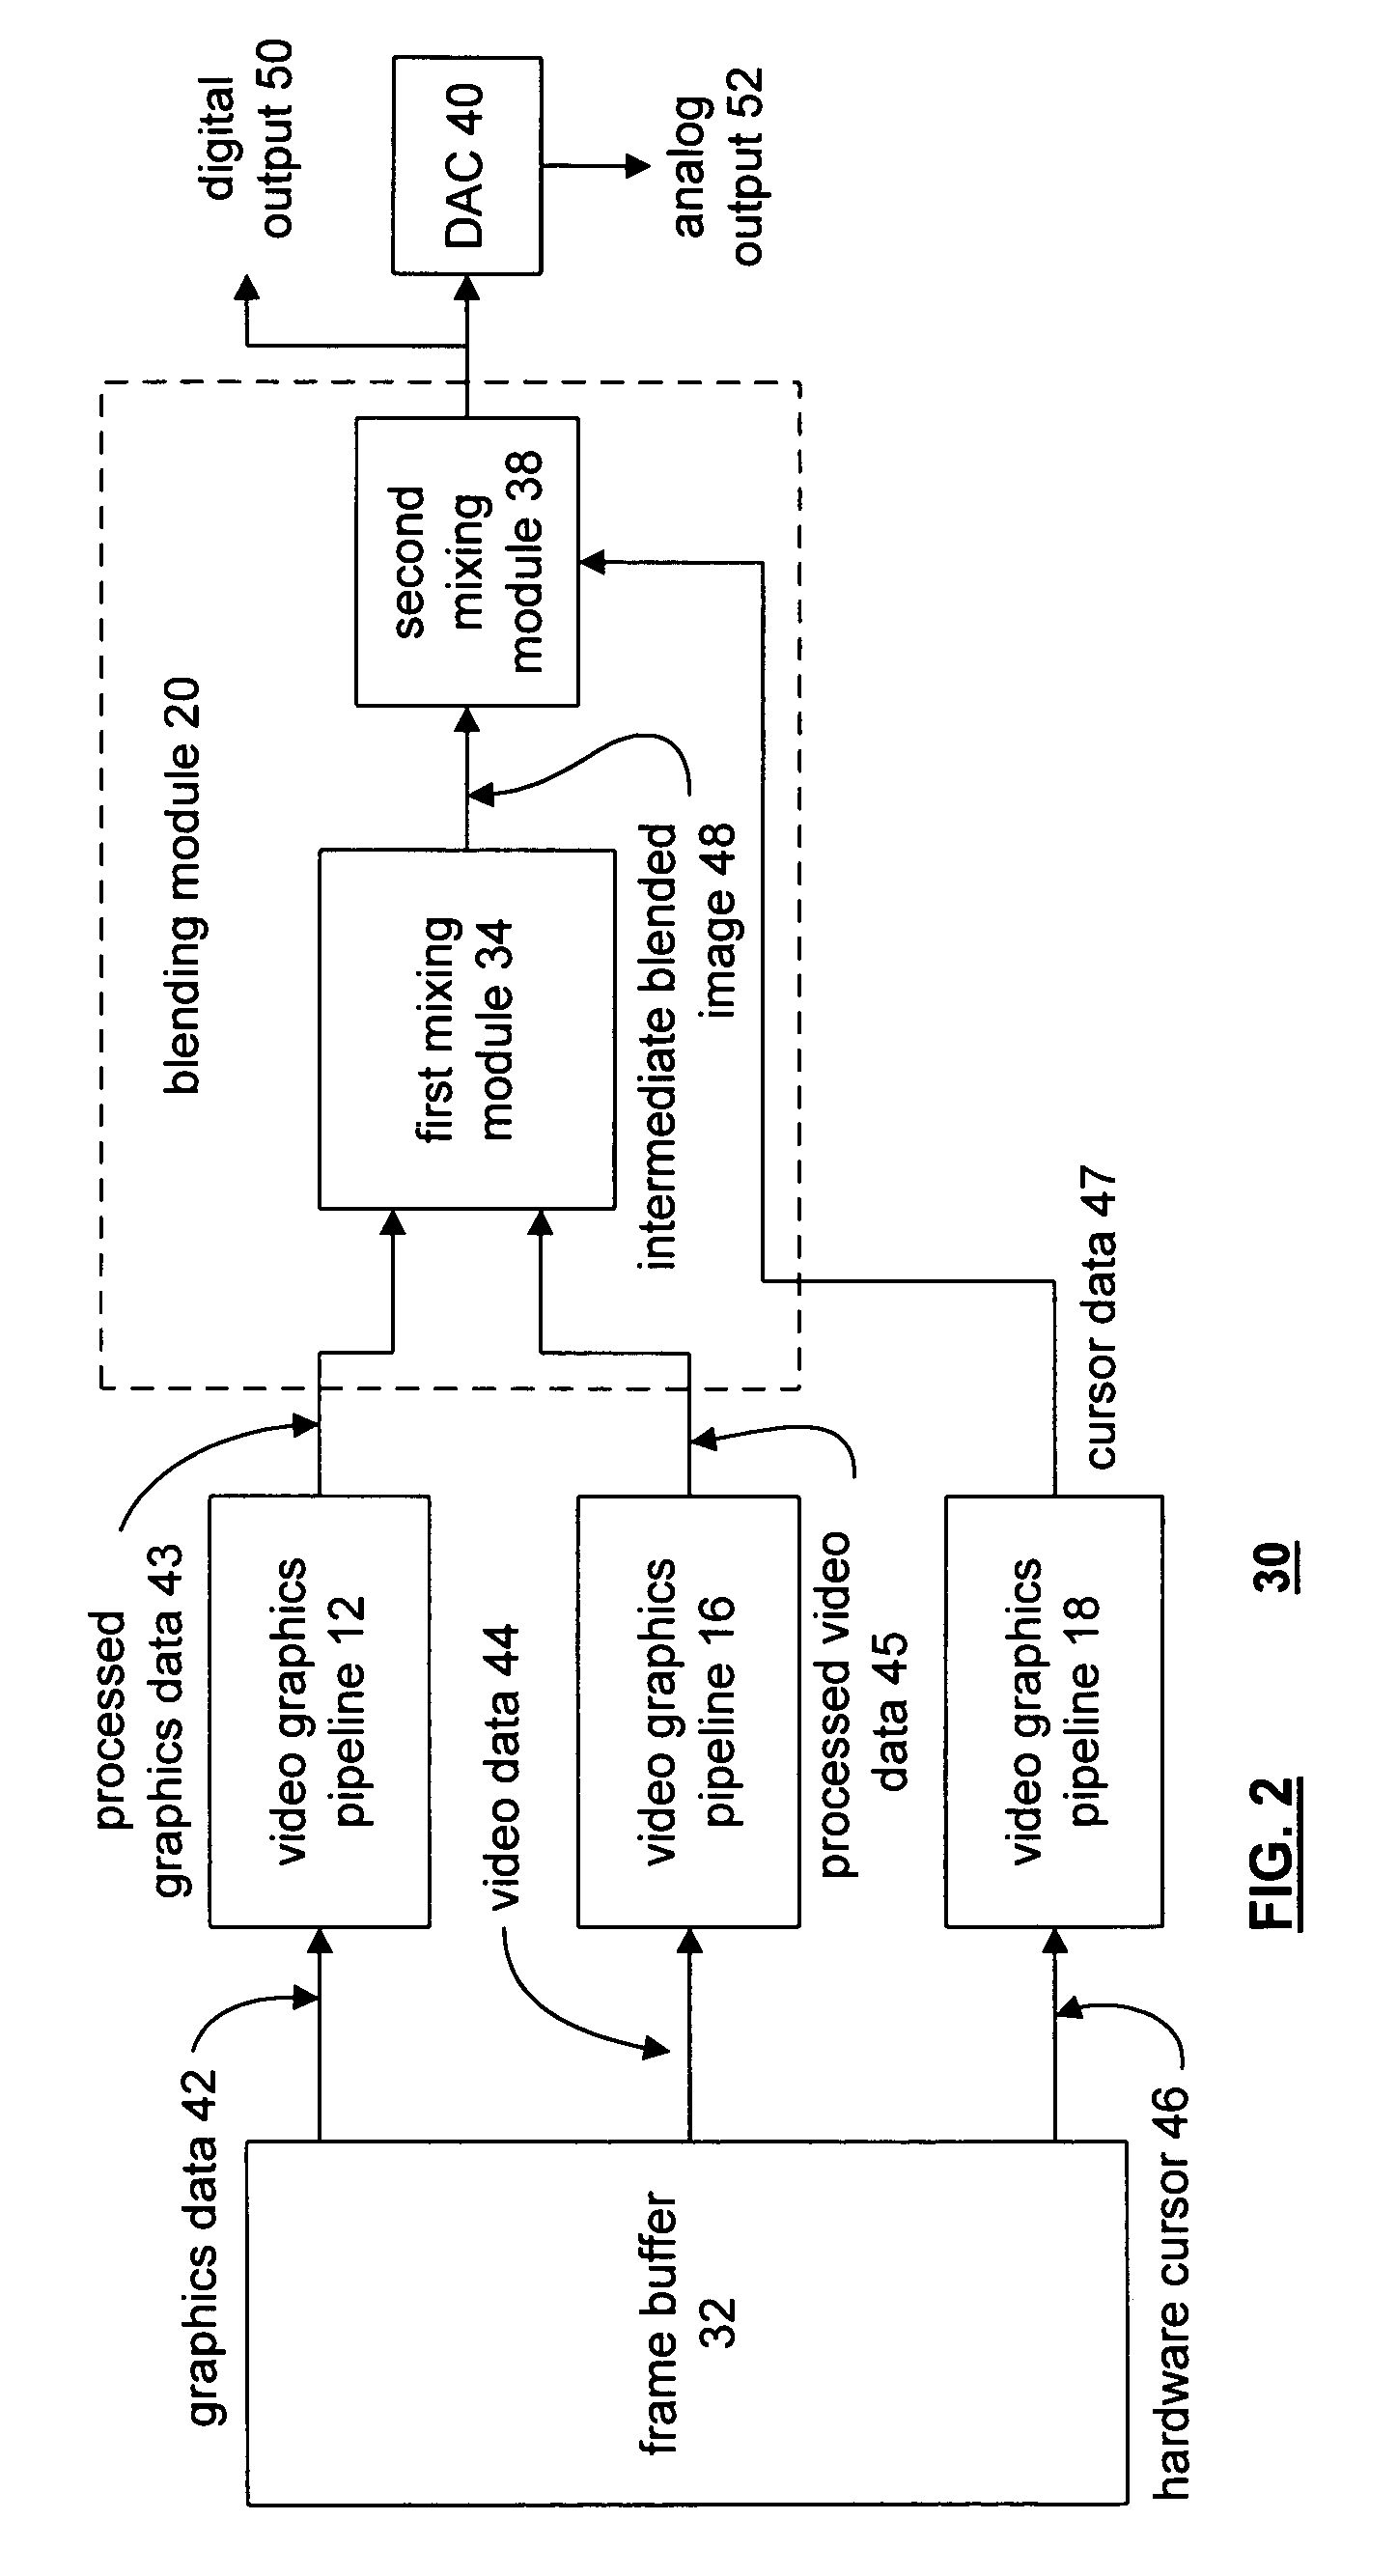 Video graphics module capable of blending multiple image layers